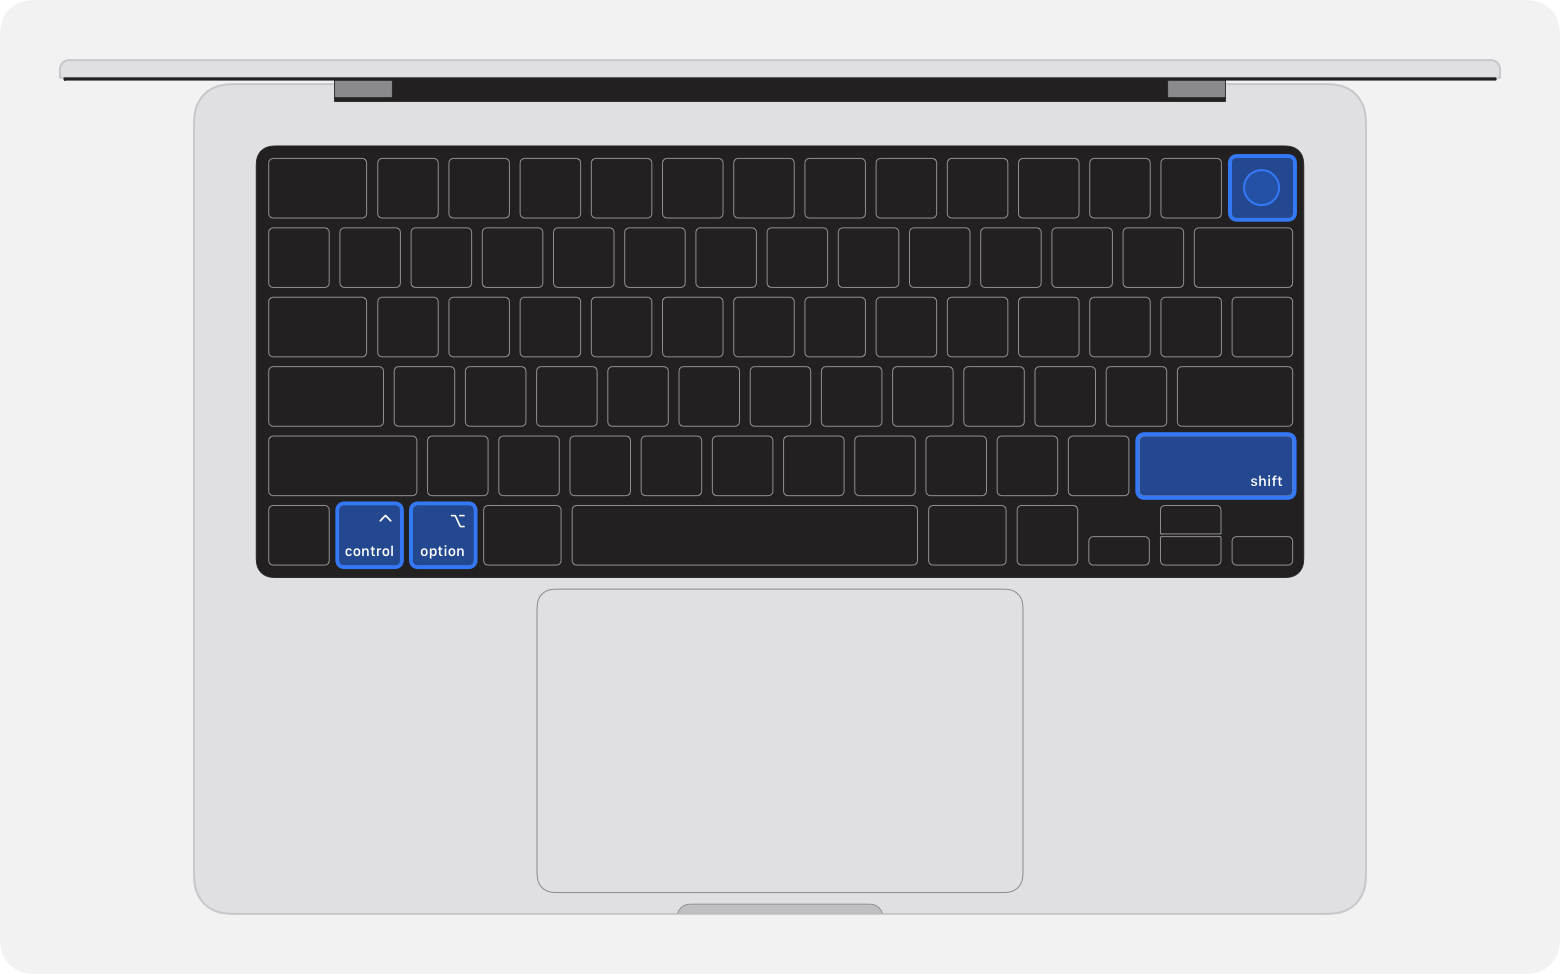 Top image of laptop computer with the four keys highlighted